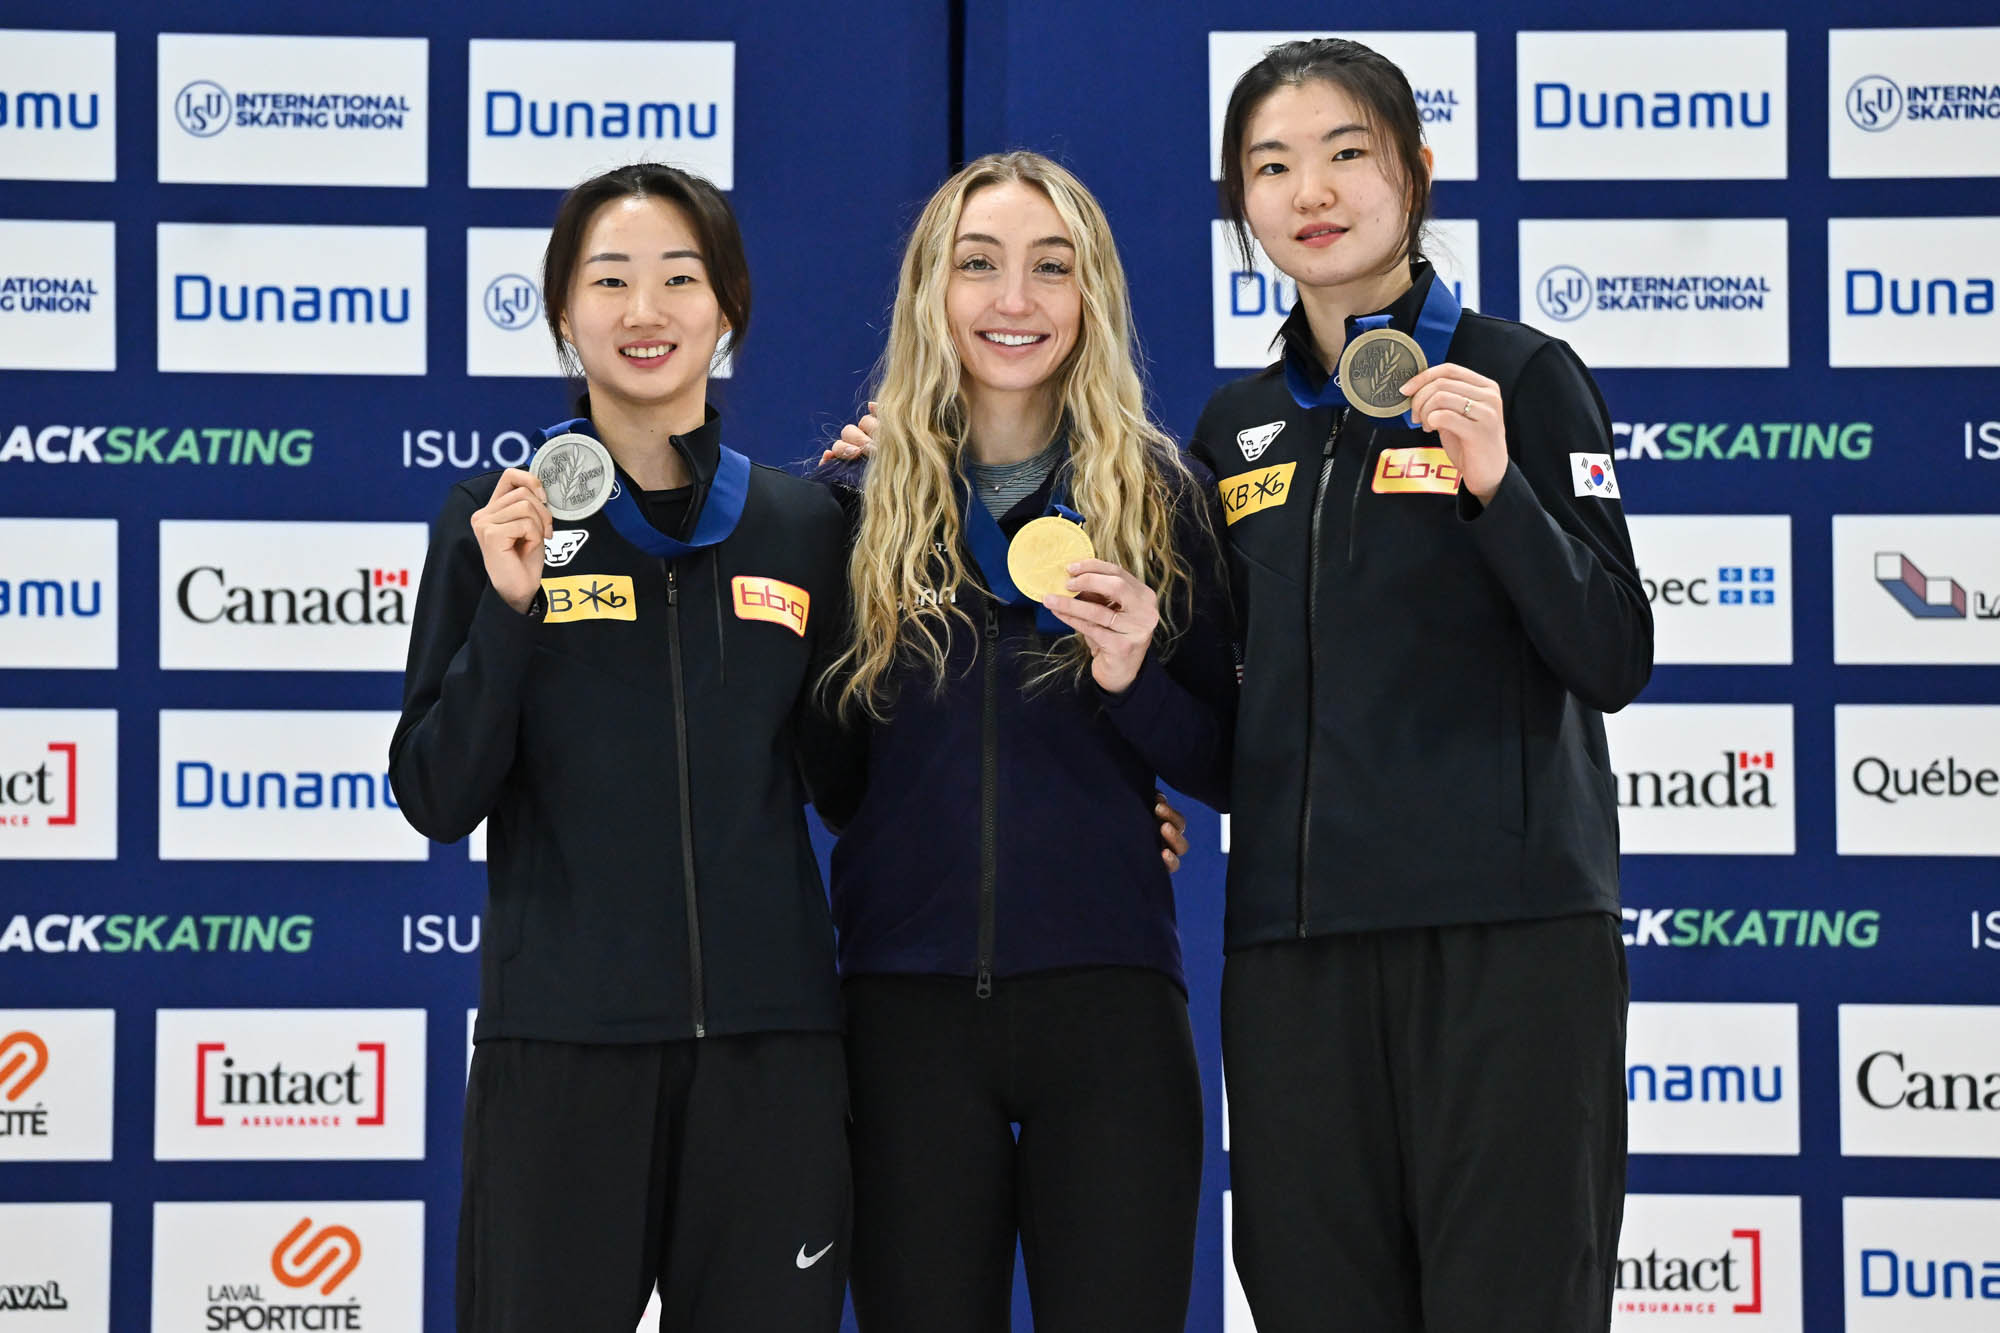 LAVAL, CANADA - NOVEMBER 04:  (L-R) Park Jiwon of the Republic of Korea, Kristen Santos-Griswold of the United States of America and Shim Suk Hee of the Republic of Korea pose with their medals after competing in the women’s 500 m final during the ISU Four Continents Short Track Speed Skating Championships at Place Bell on November 4, 2023 in Laval, Quebec, Canada.  (Photo by Minas Panagiotakis - International Skating Union/International Skating Union via Getty Images)